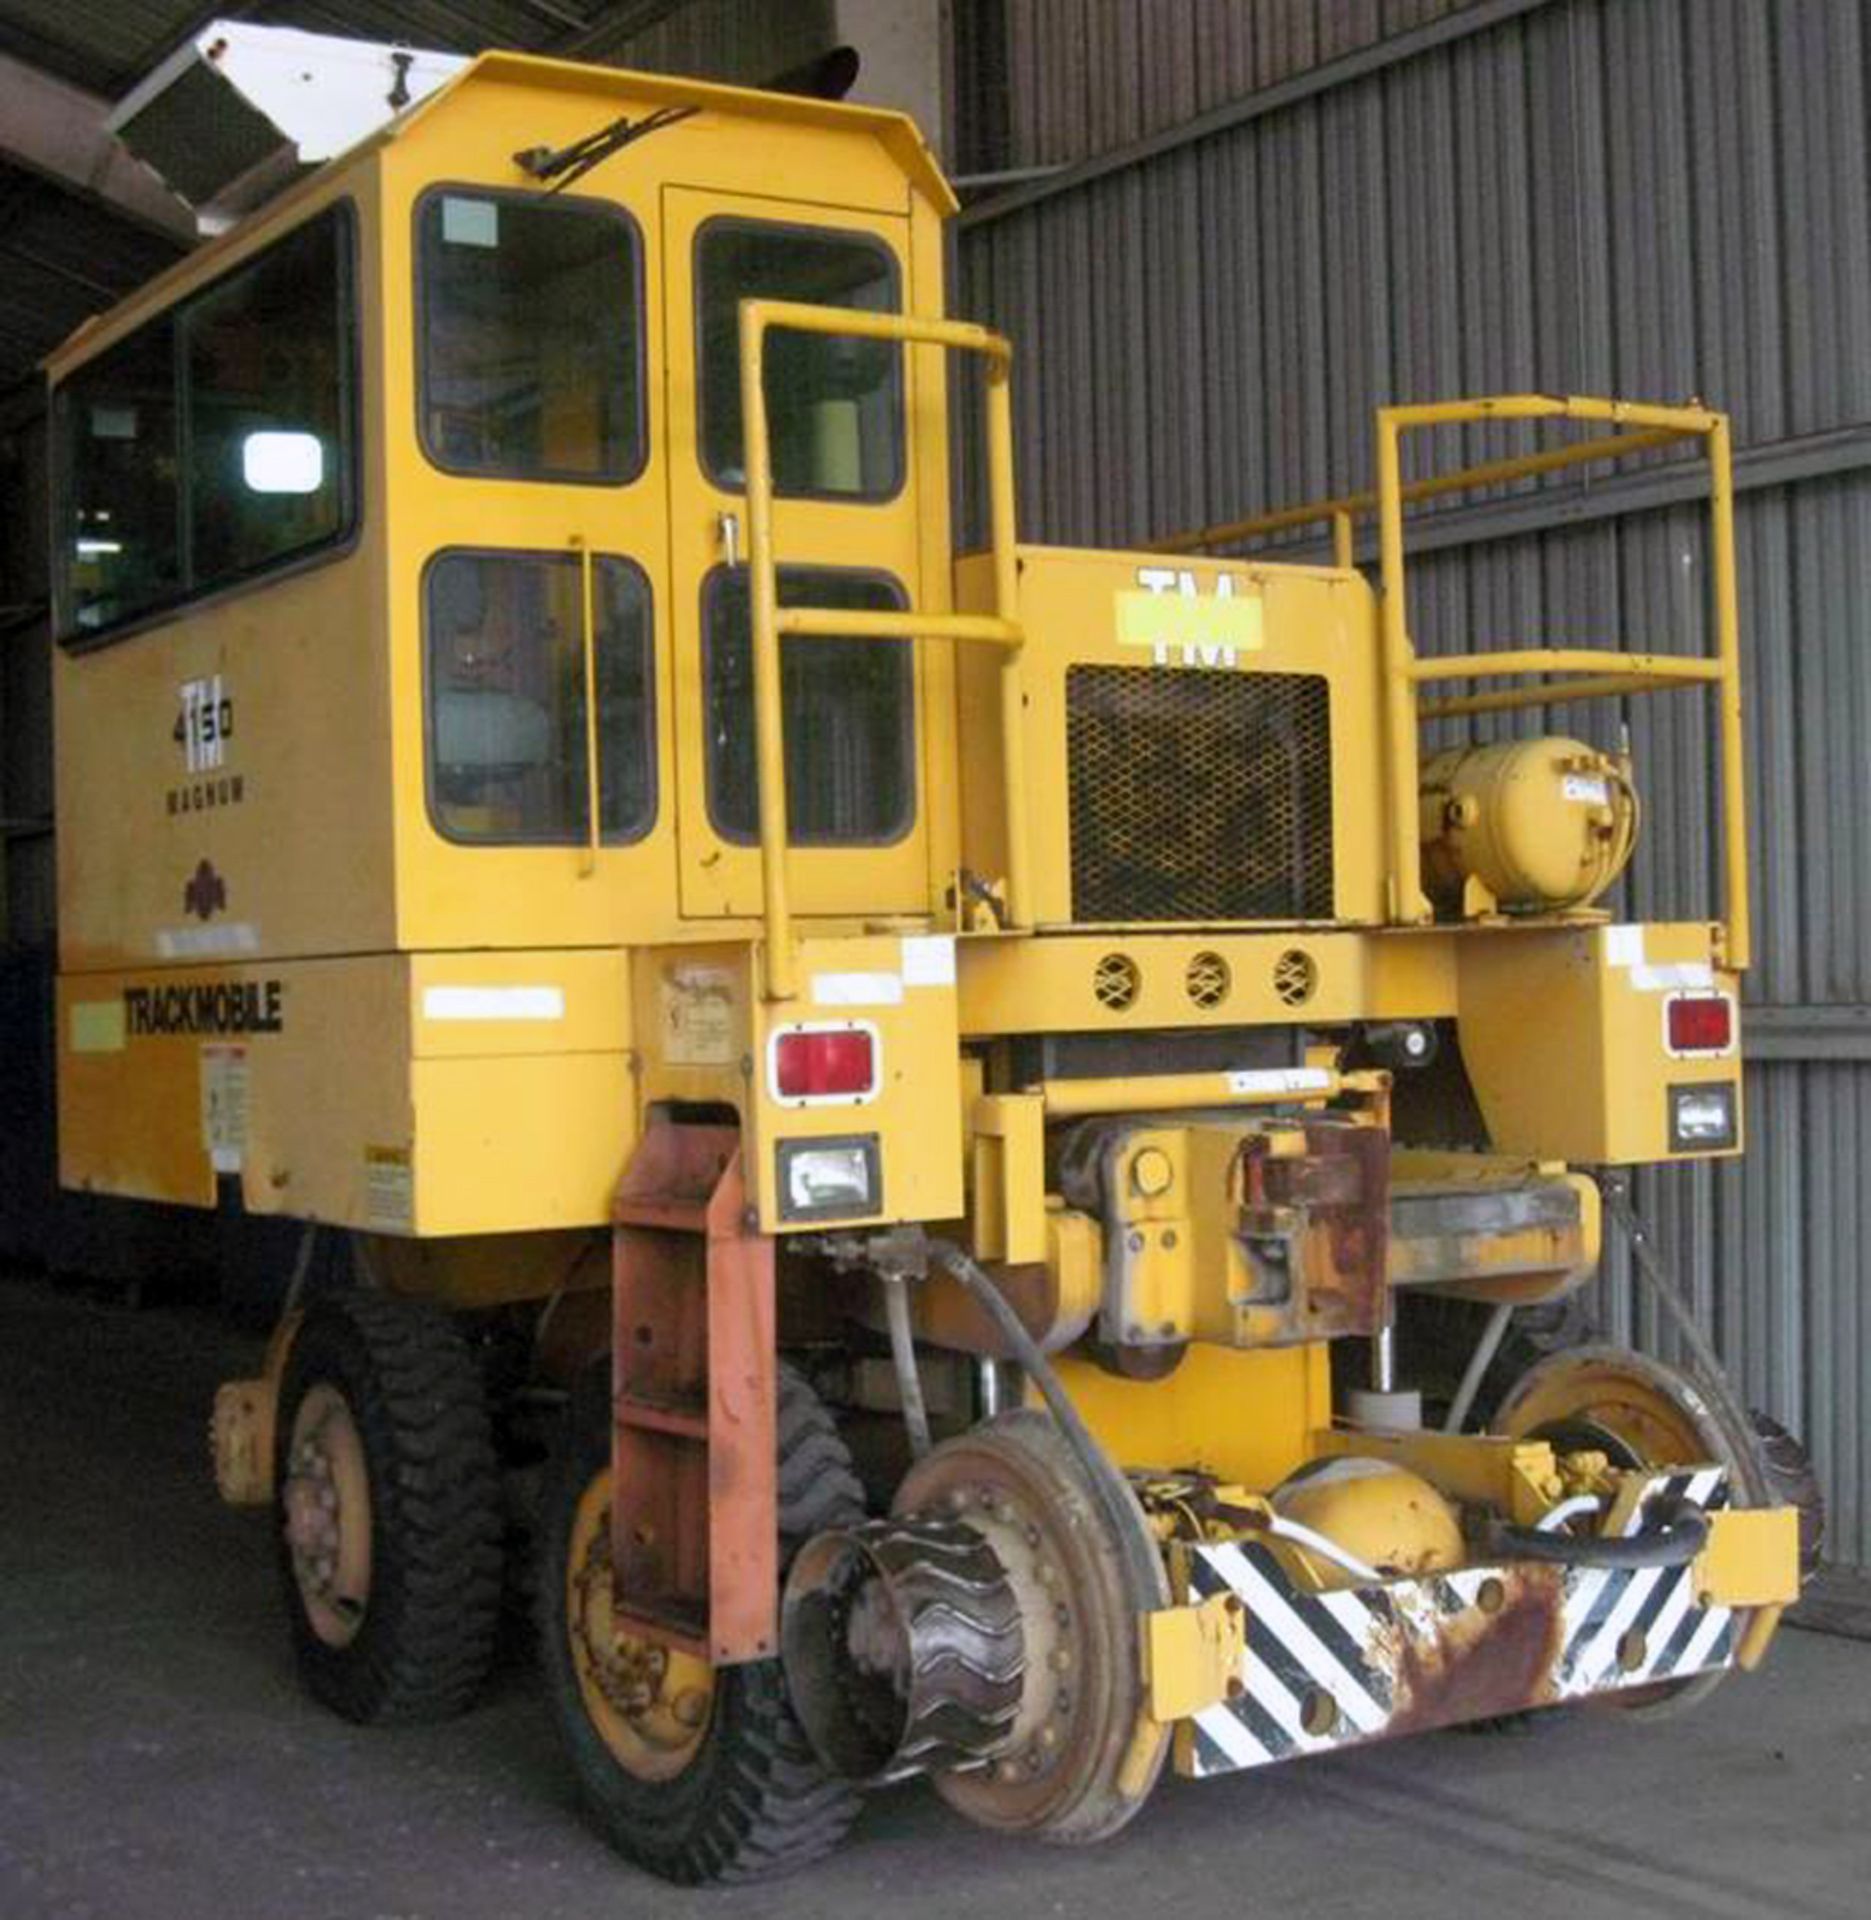 1998 Trackmobile Railcar Mover, Model: 4150, Serial #: LGN 971460898, Approx. Hours On Meter: 4163 - Image 10 of 10